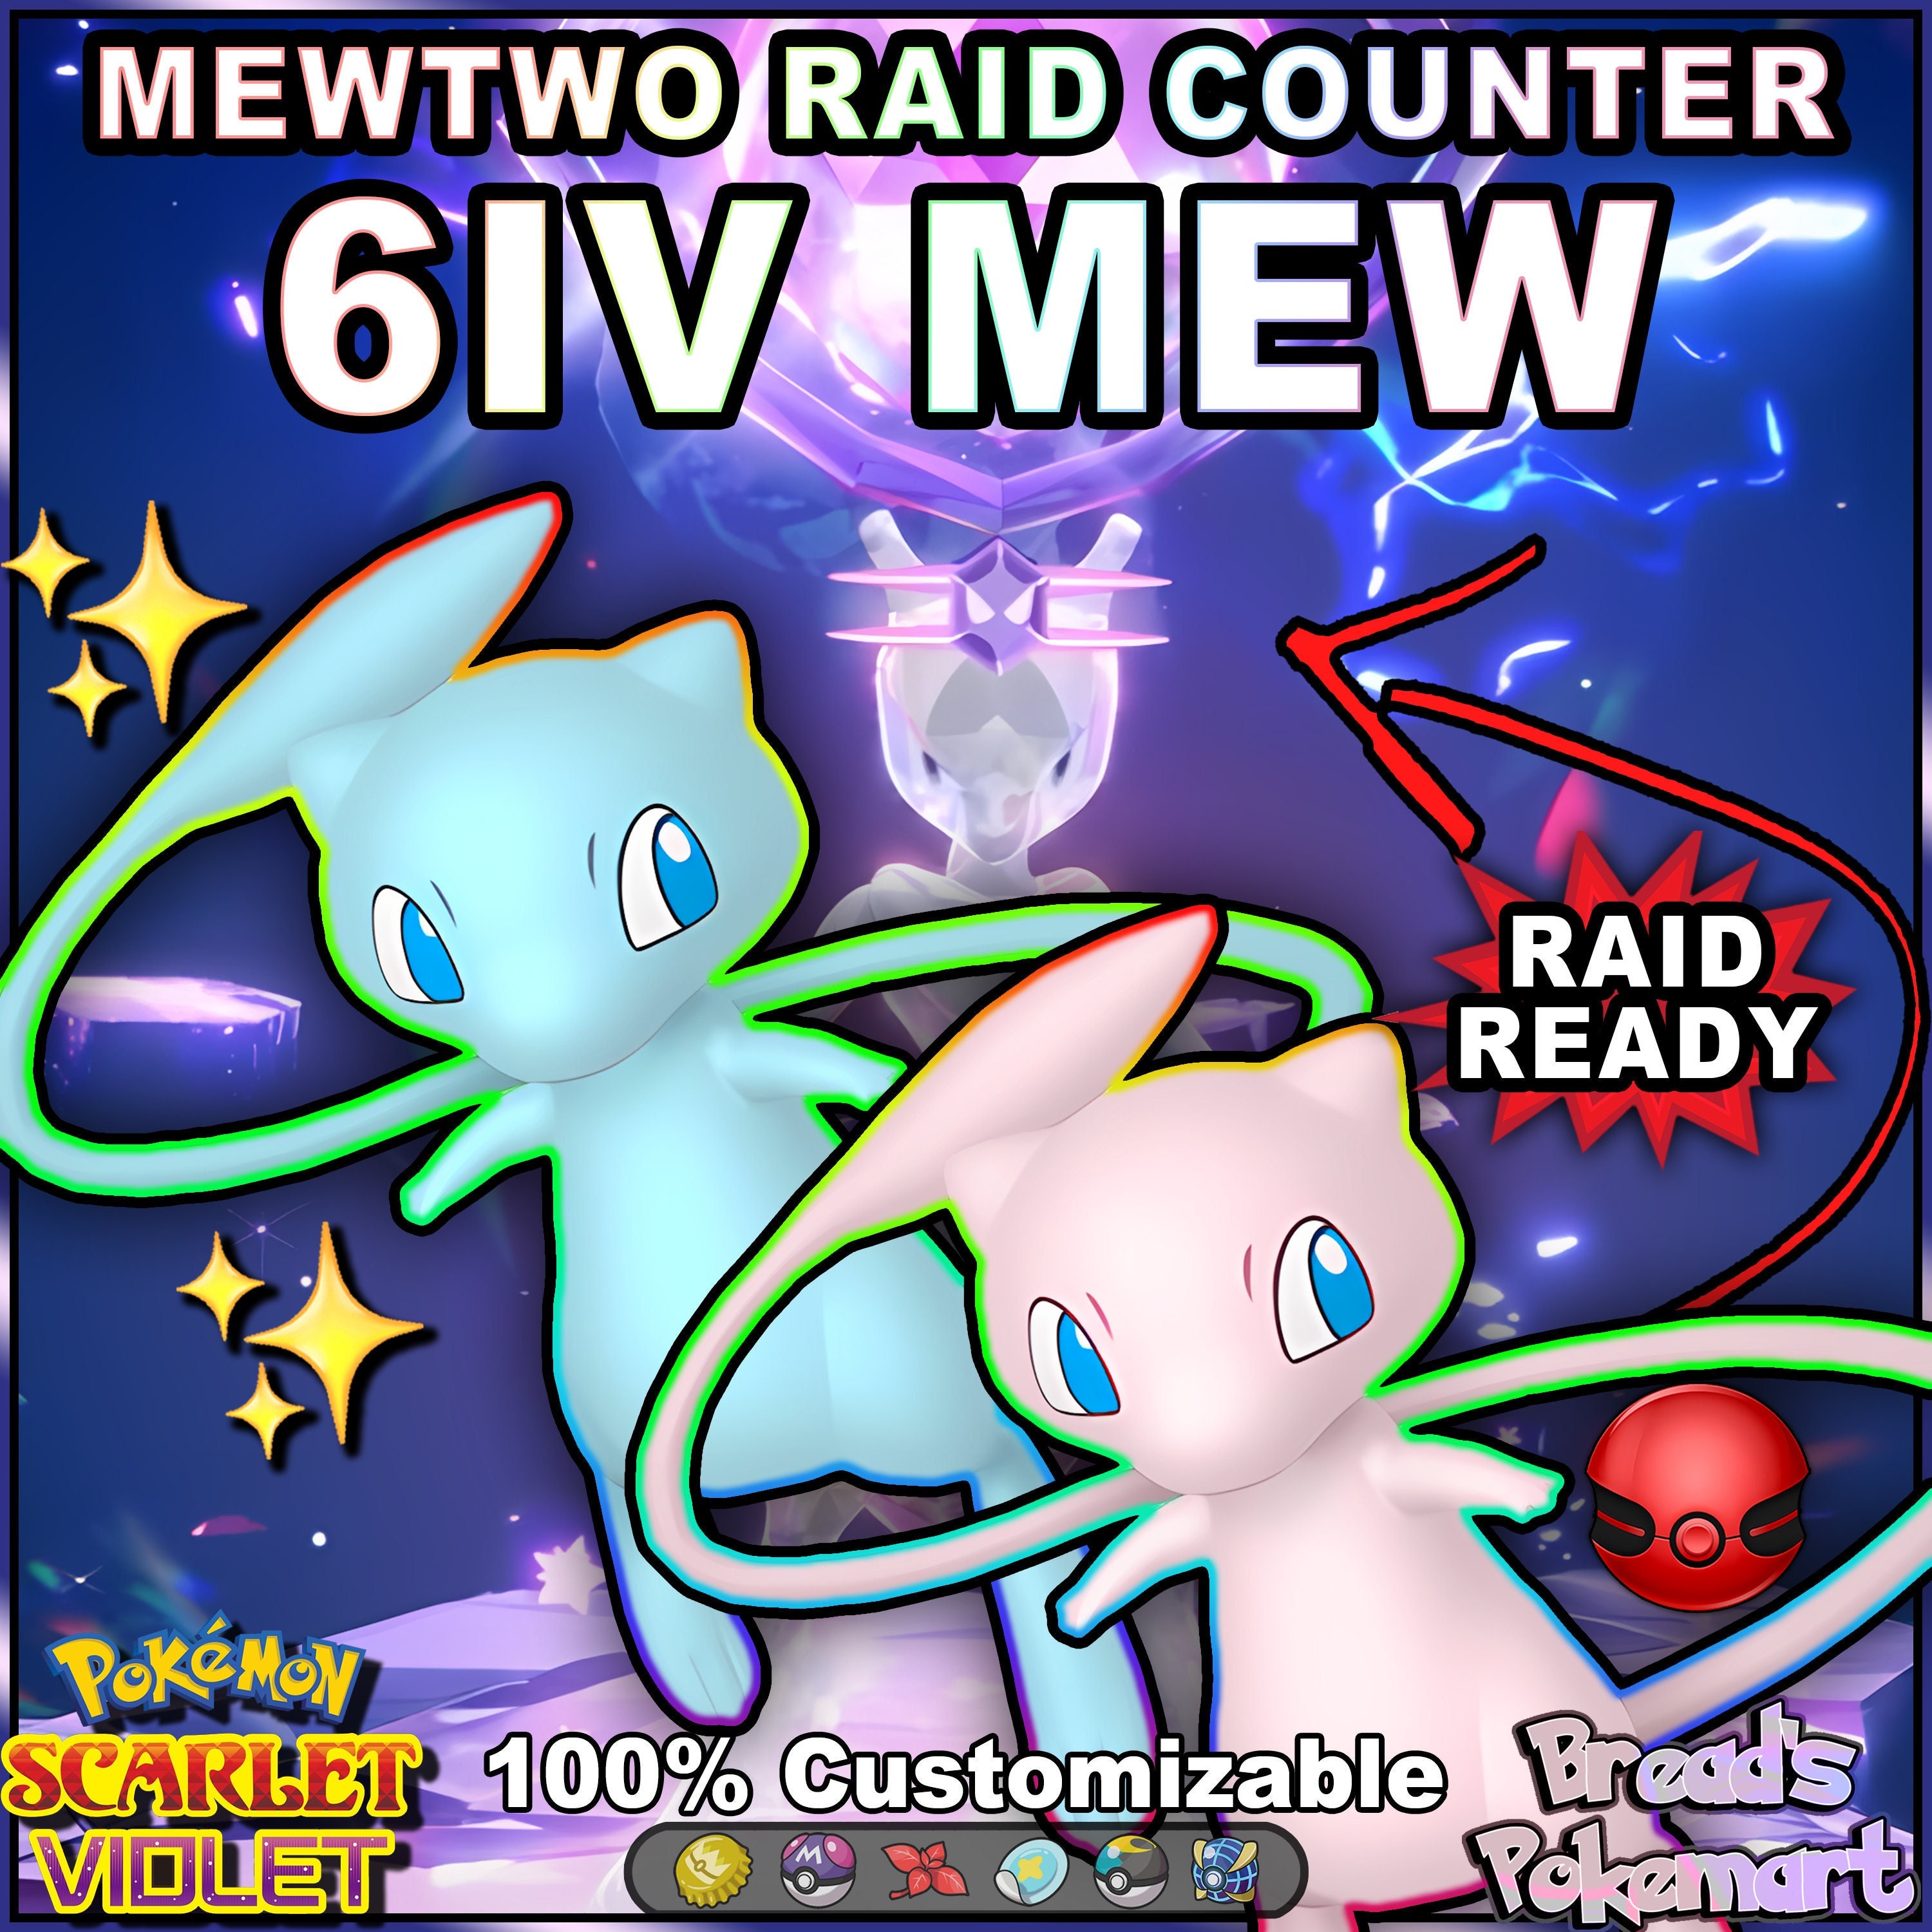 Pokémon Scarlet and Violet Getting Mew and Mewtwo